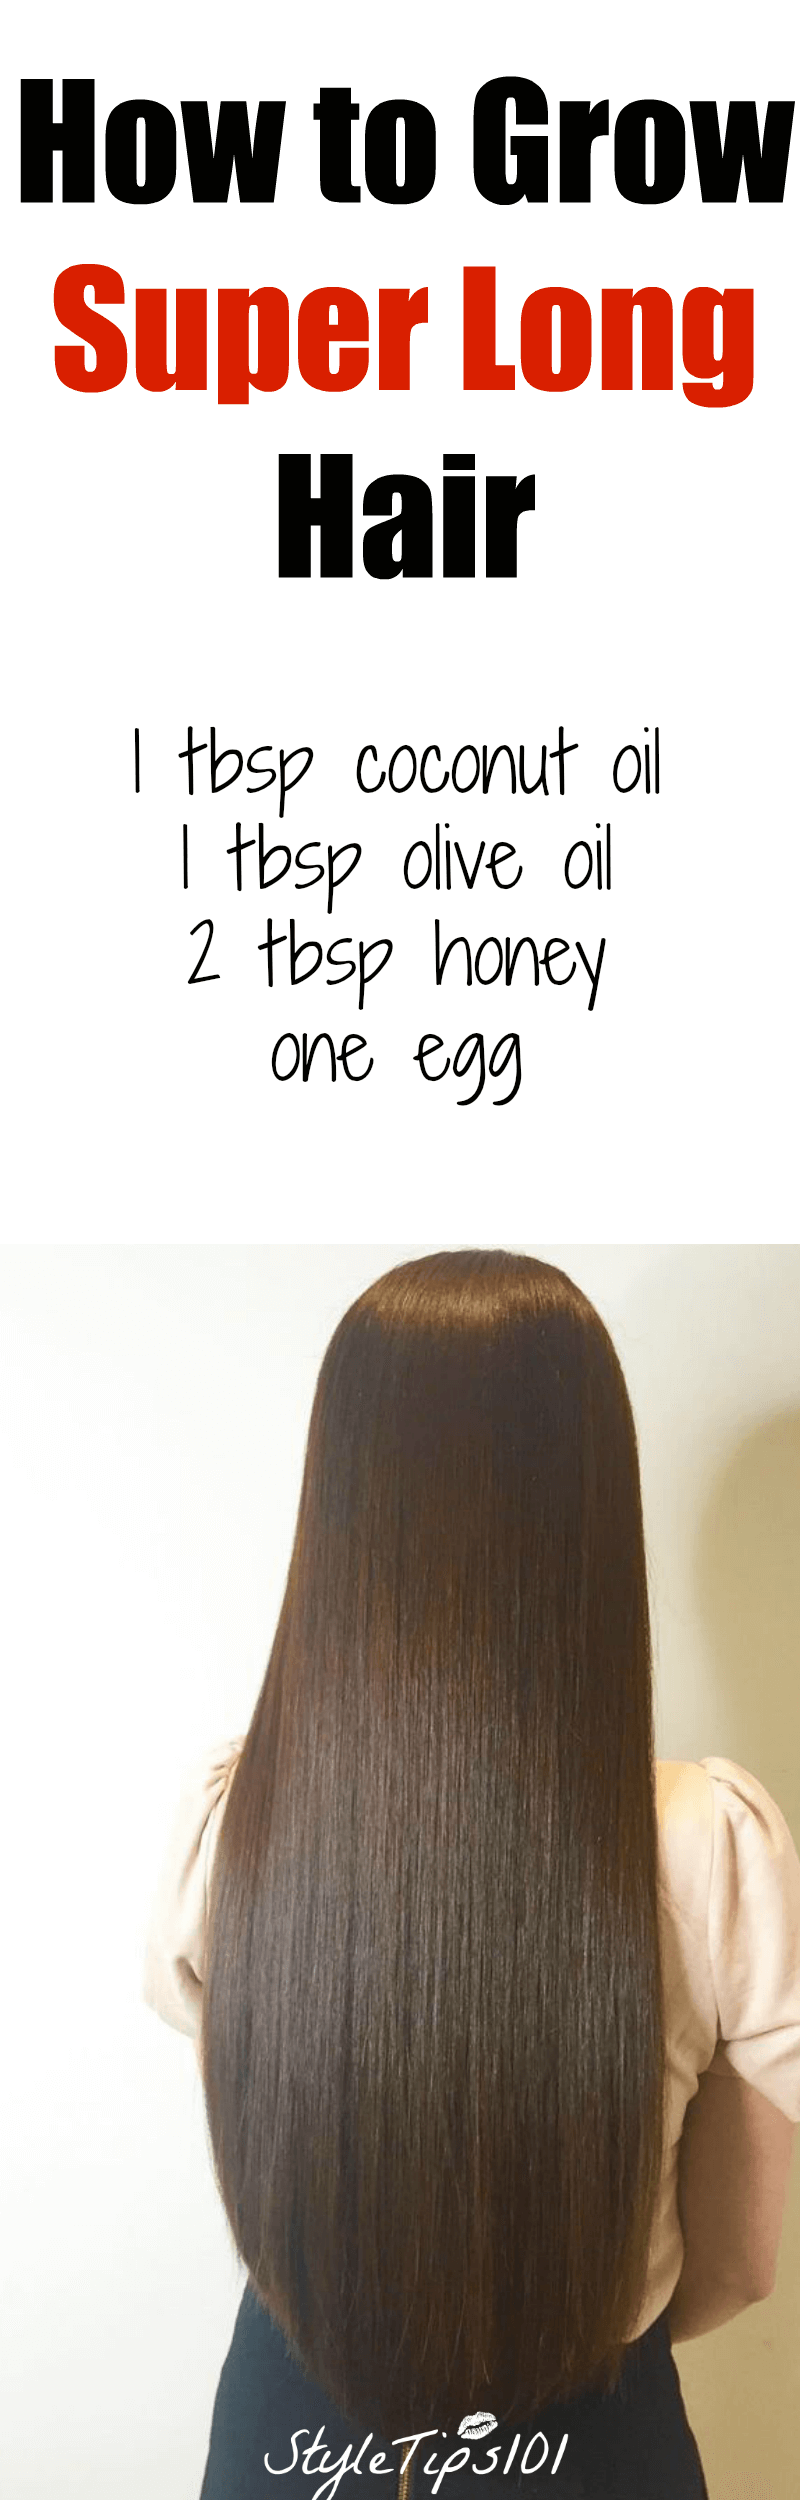 How to Grow Super Long Hair